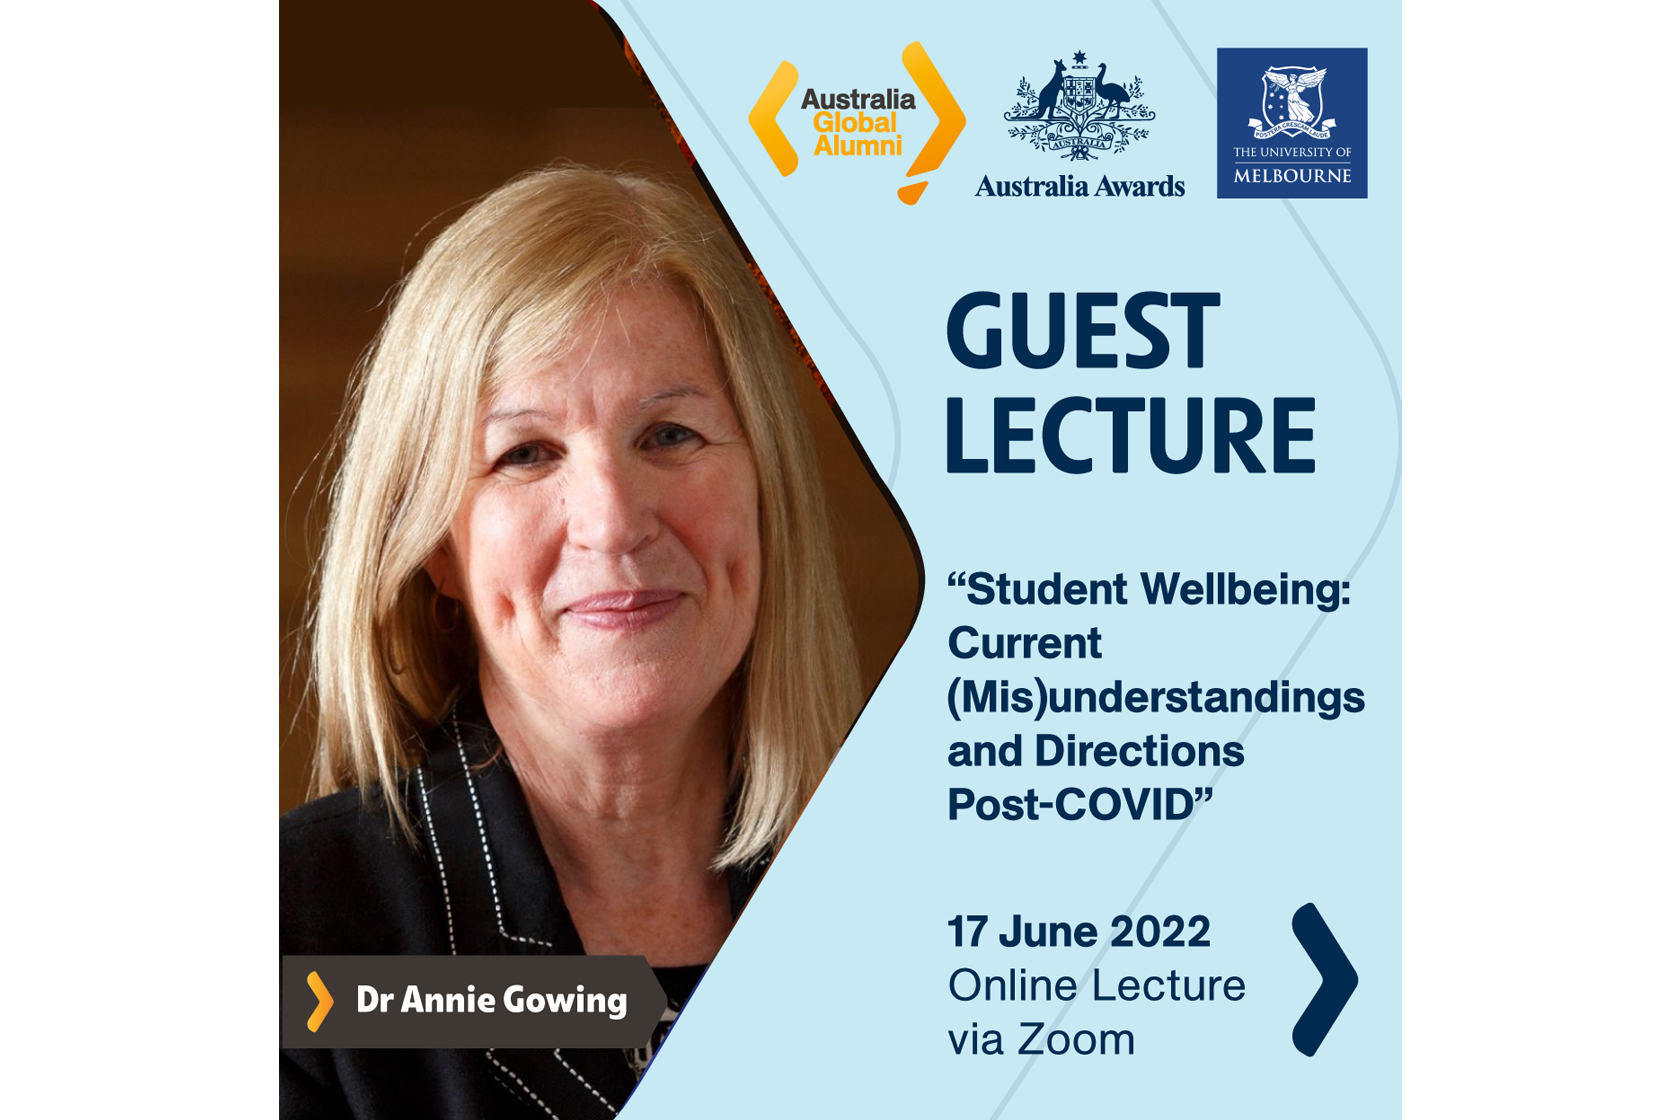 Join Our Online Lecture on Student Wellbeing: Current (Mis)understandings and Directions Post-COVID